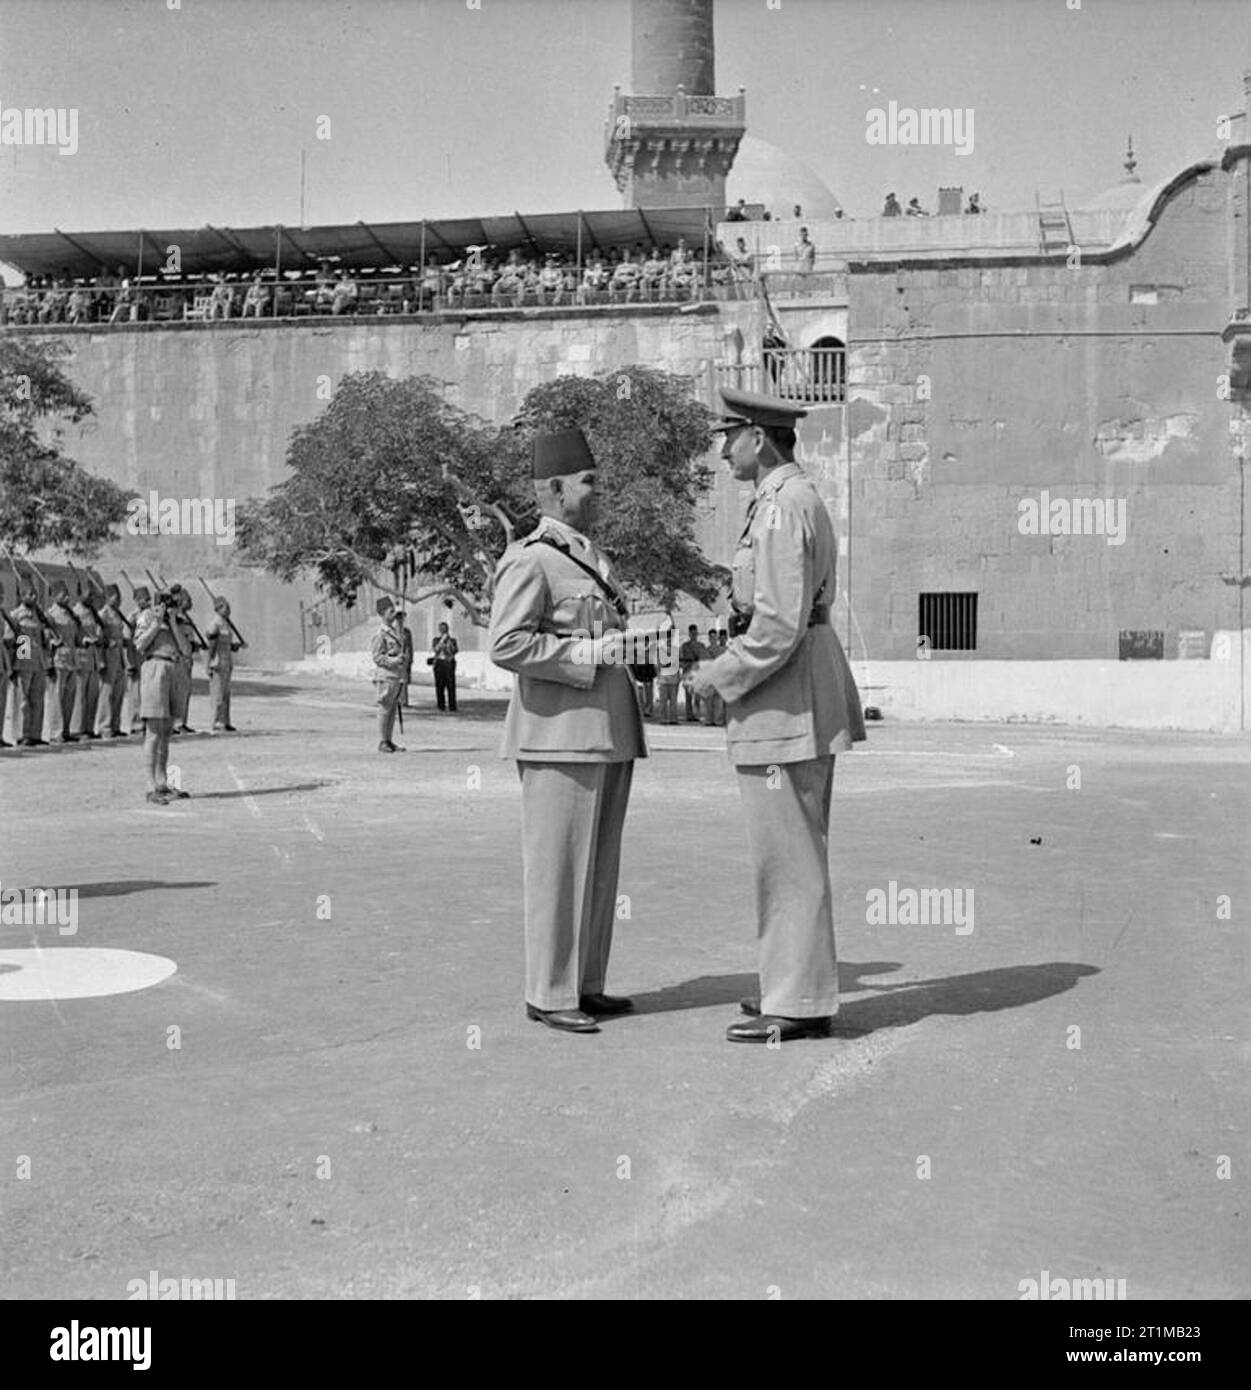 British Forces in the Middle East, 1945-1947 Lieutenant General Sir Charles Allfrey hands the key of the Citadel to the Egyptian Chief of Staff, Ferick Ibrahim Attallah Pasha, marking the formal handover of the fortress to local control. This ceremony was the first step towards the ending of British rule in Egypt. Stock Photo